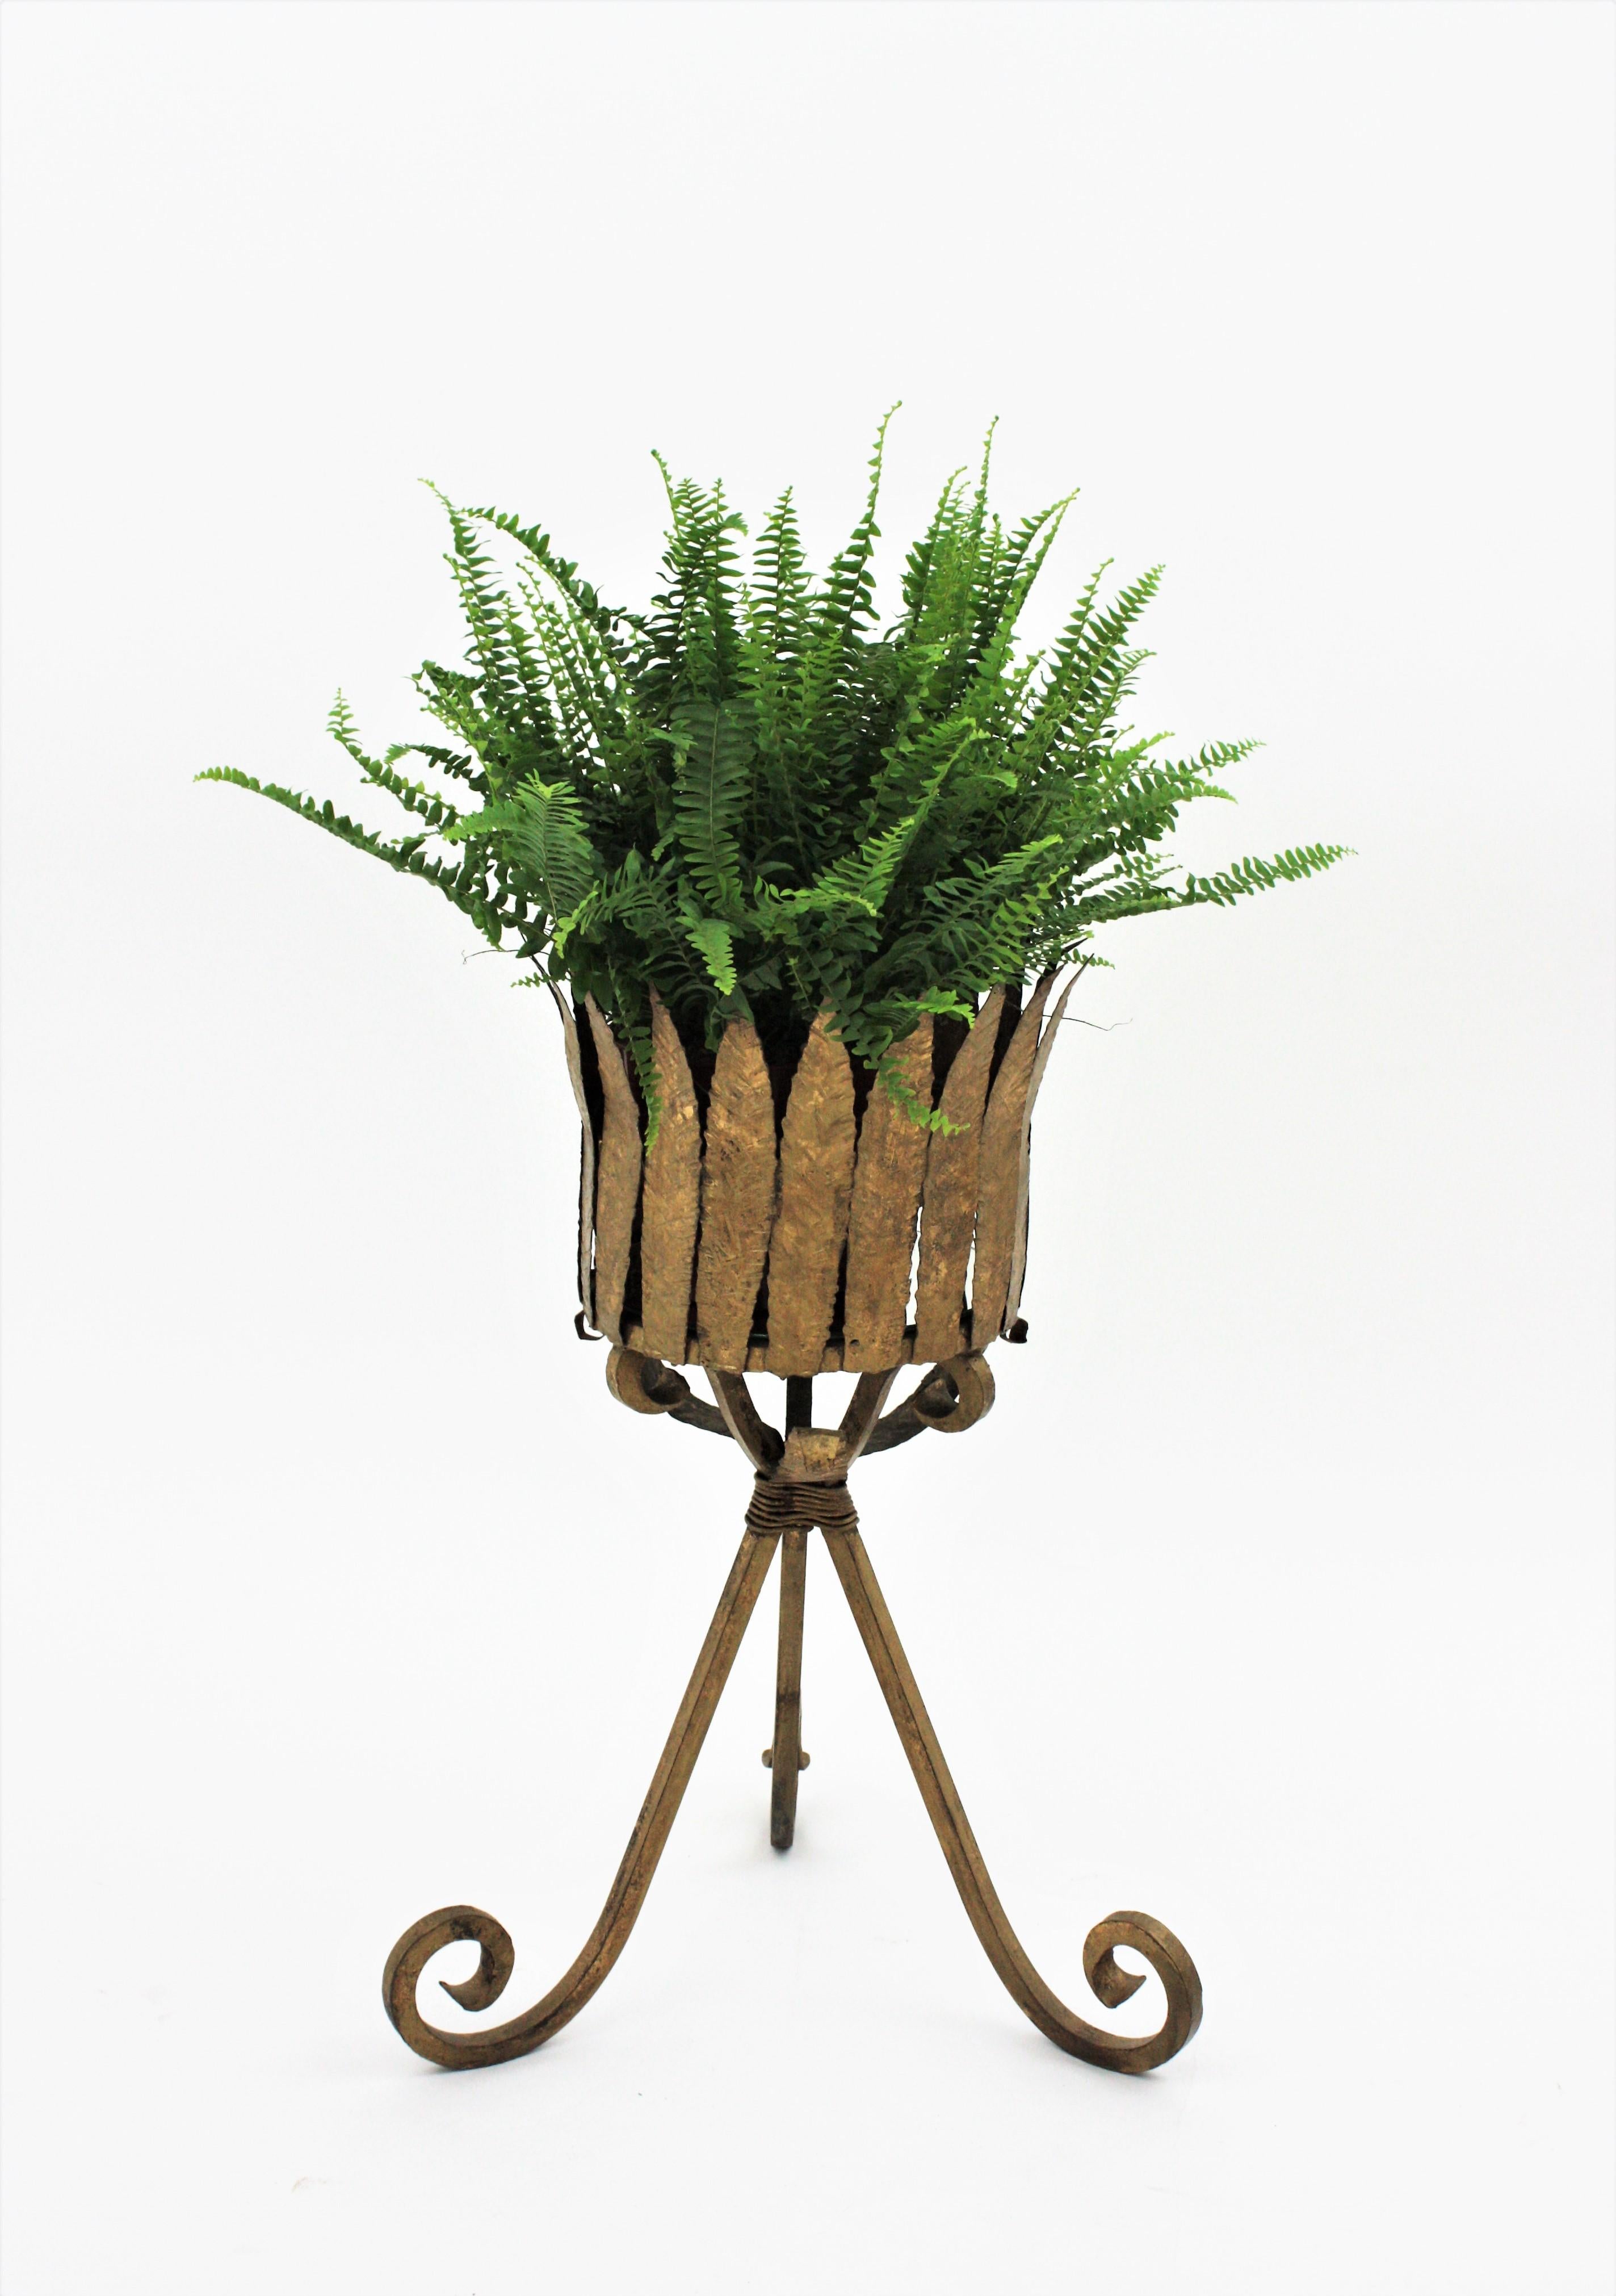 Wought gilt iron leafed planter or bottle stand standing on a tripod base. Manufactured at the Mid-Century Modern period, Spain, 1950-1960.
This eyecatching handcrafted iron stand features a leafed top standing on a tripod base with scroll endings.